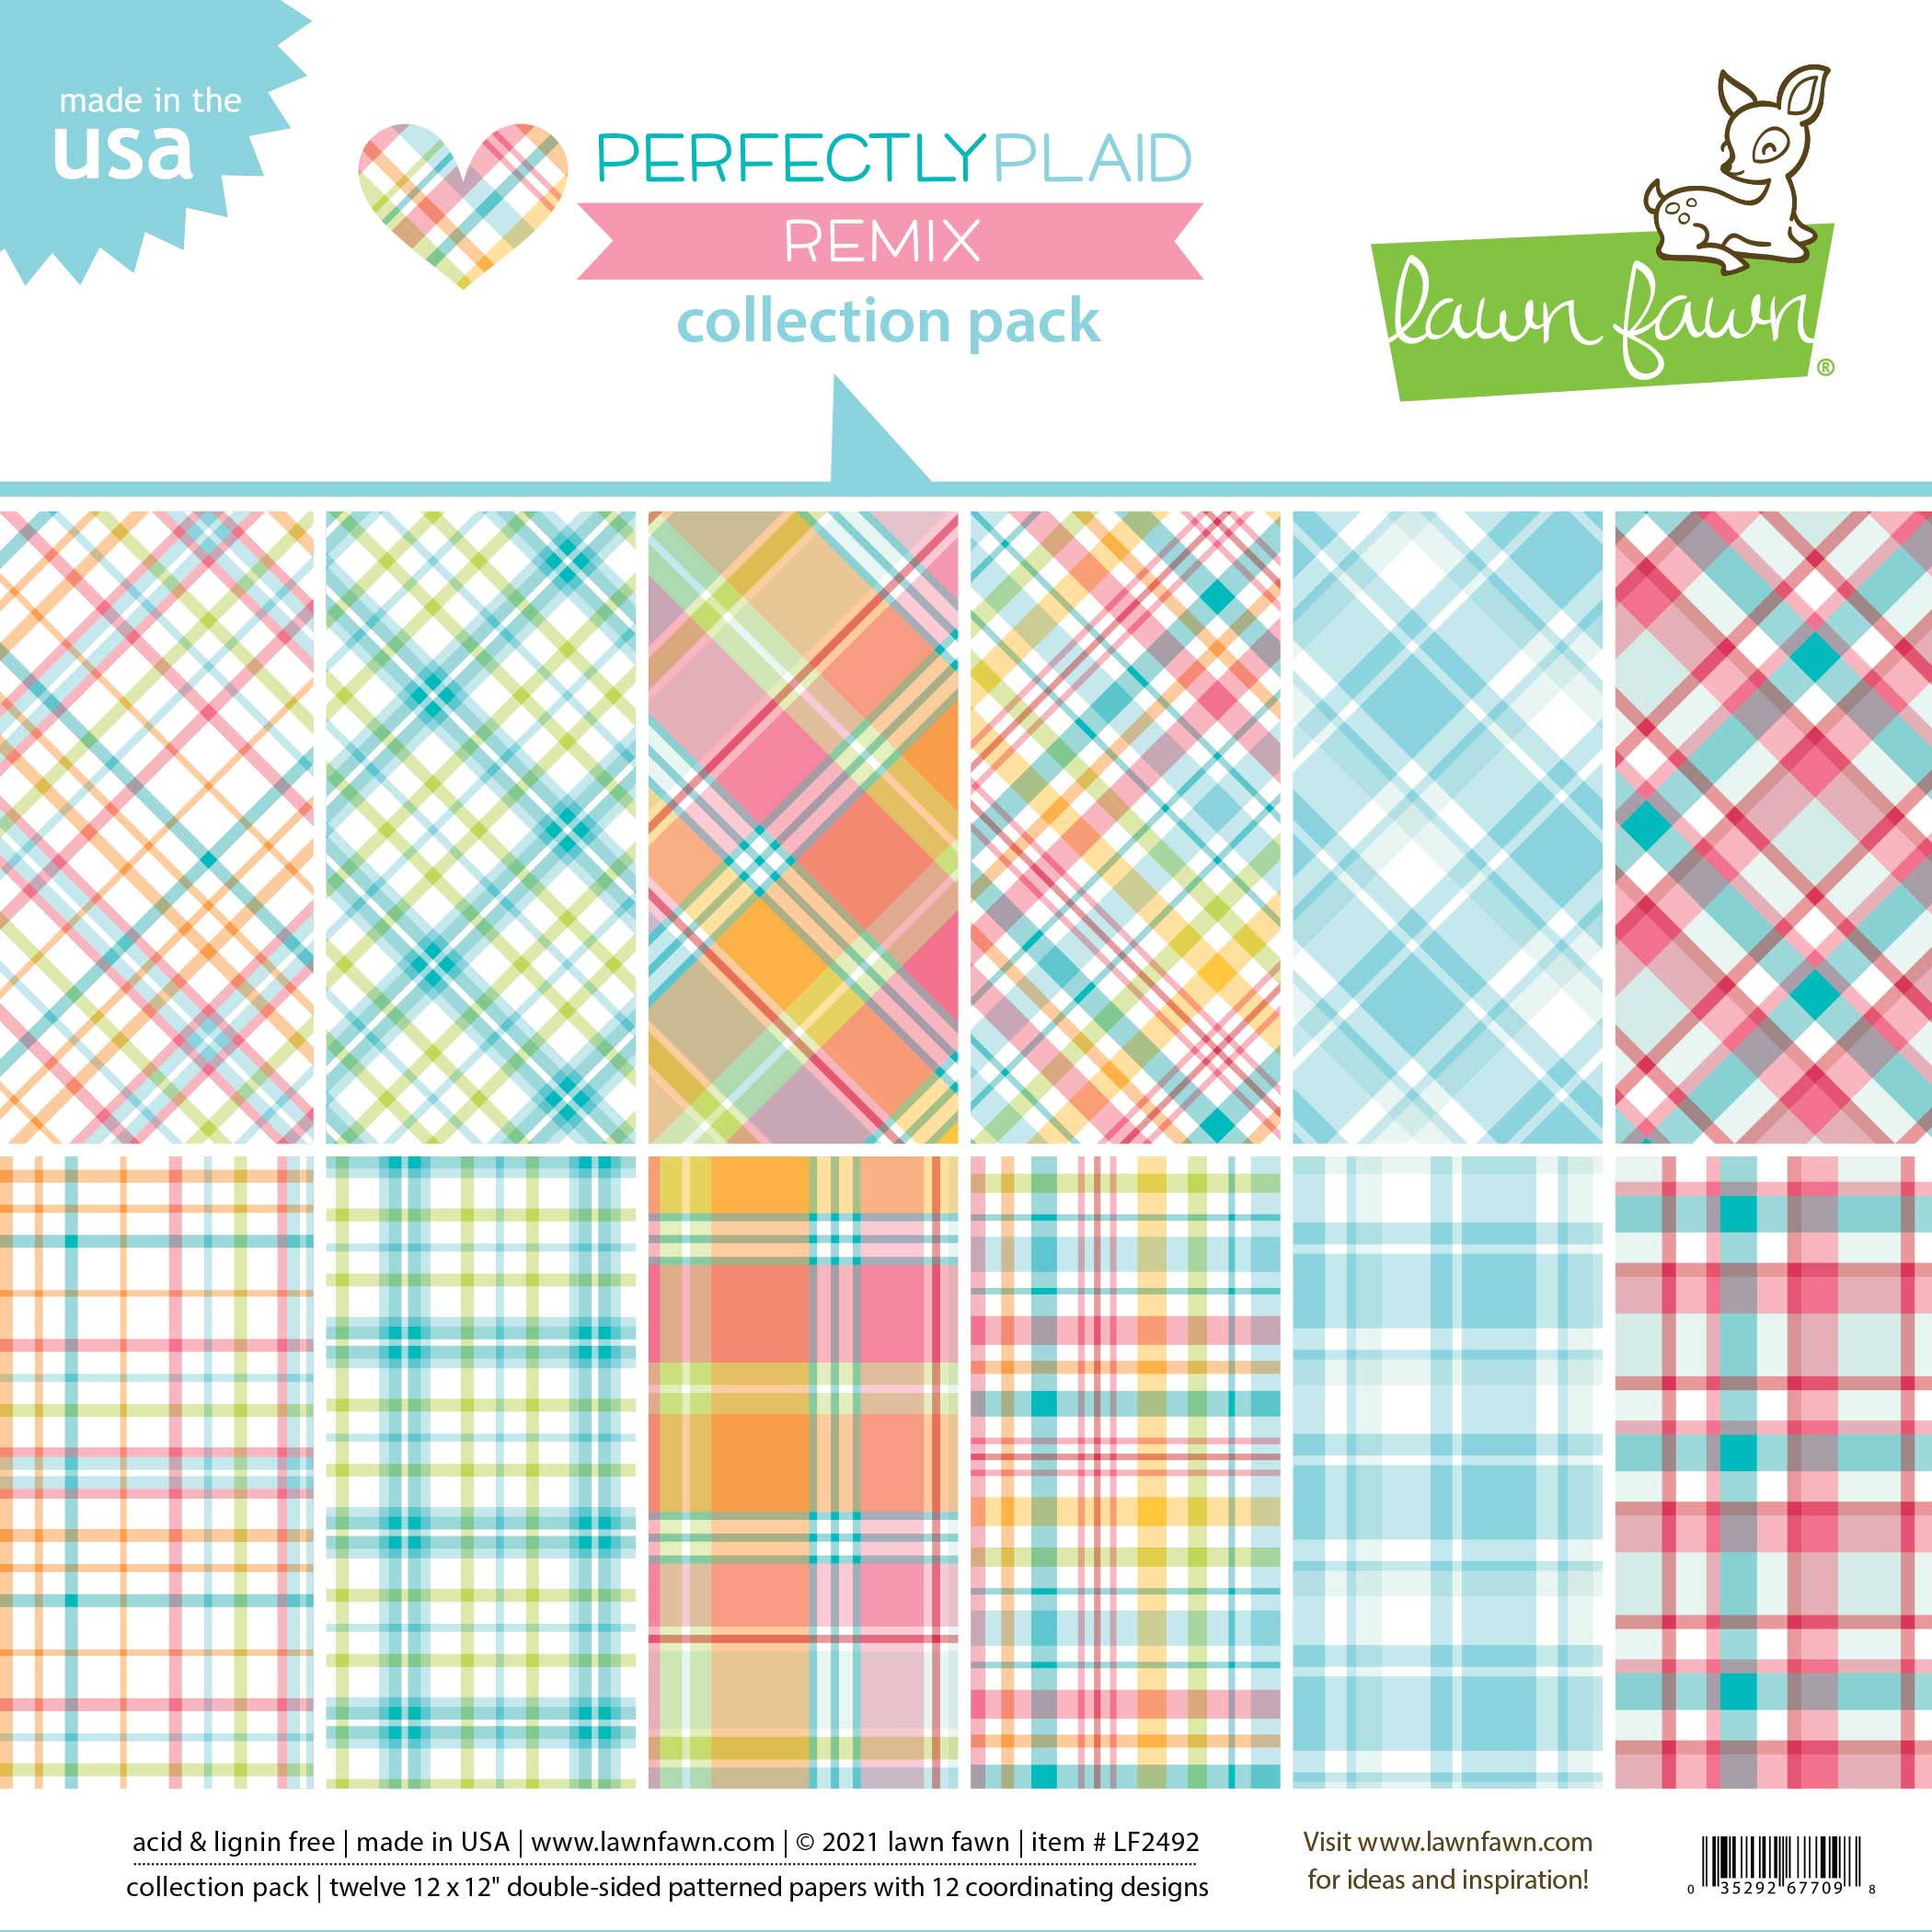 Lawn Fawn Perfectly Plaid Remix Collection Pack